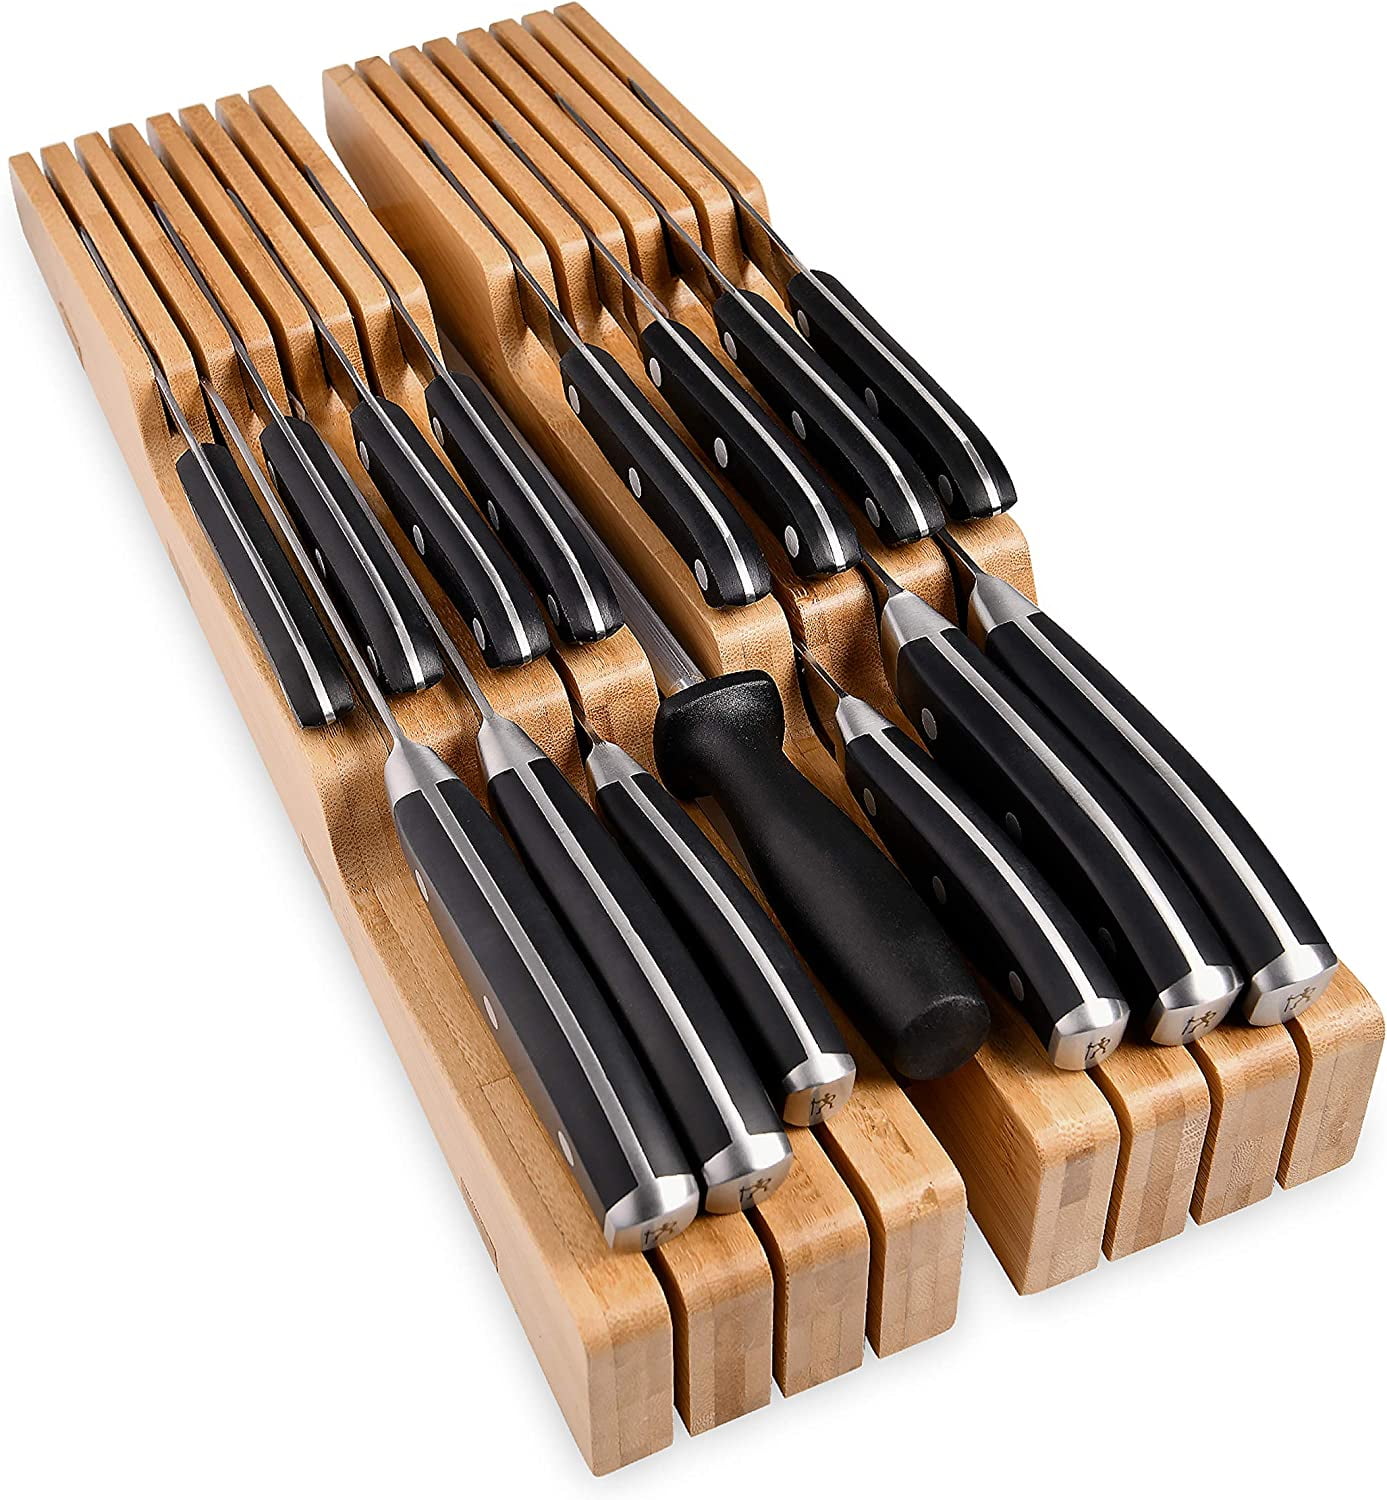 Knife Accessories - The Bamboo Guy